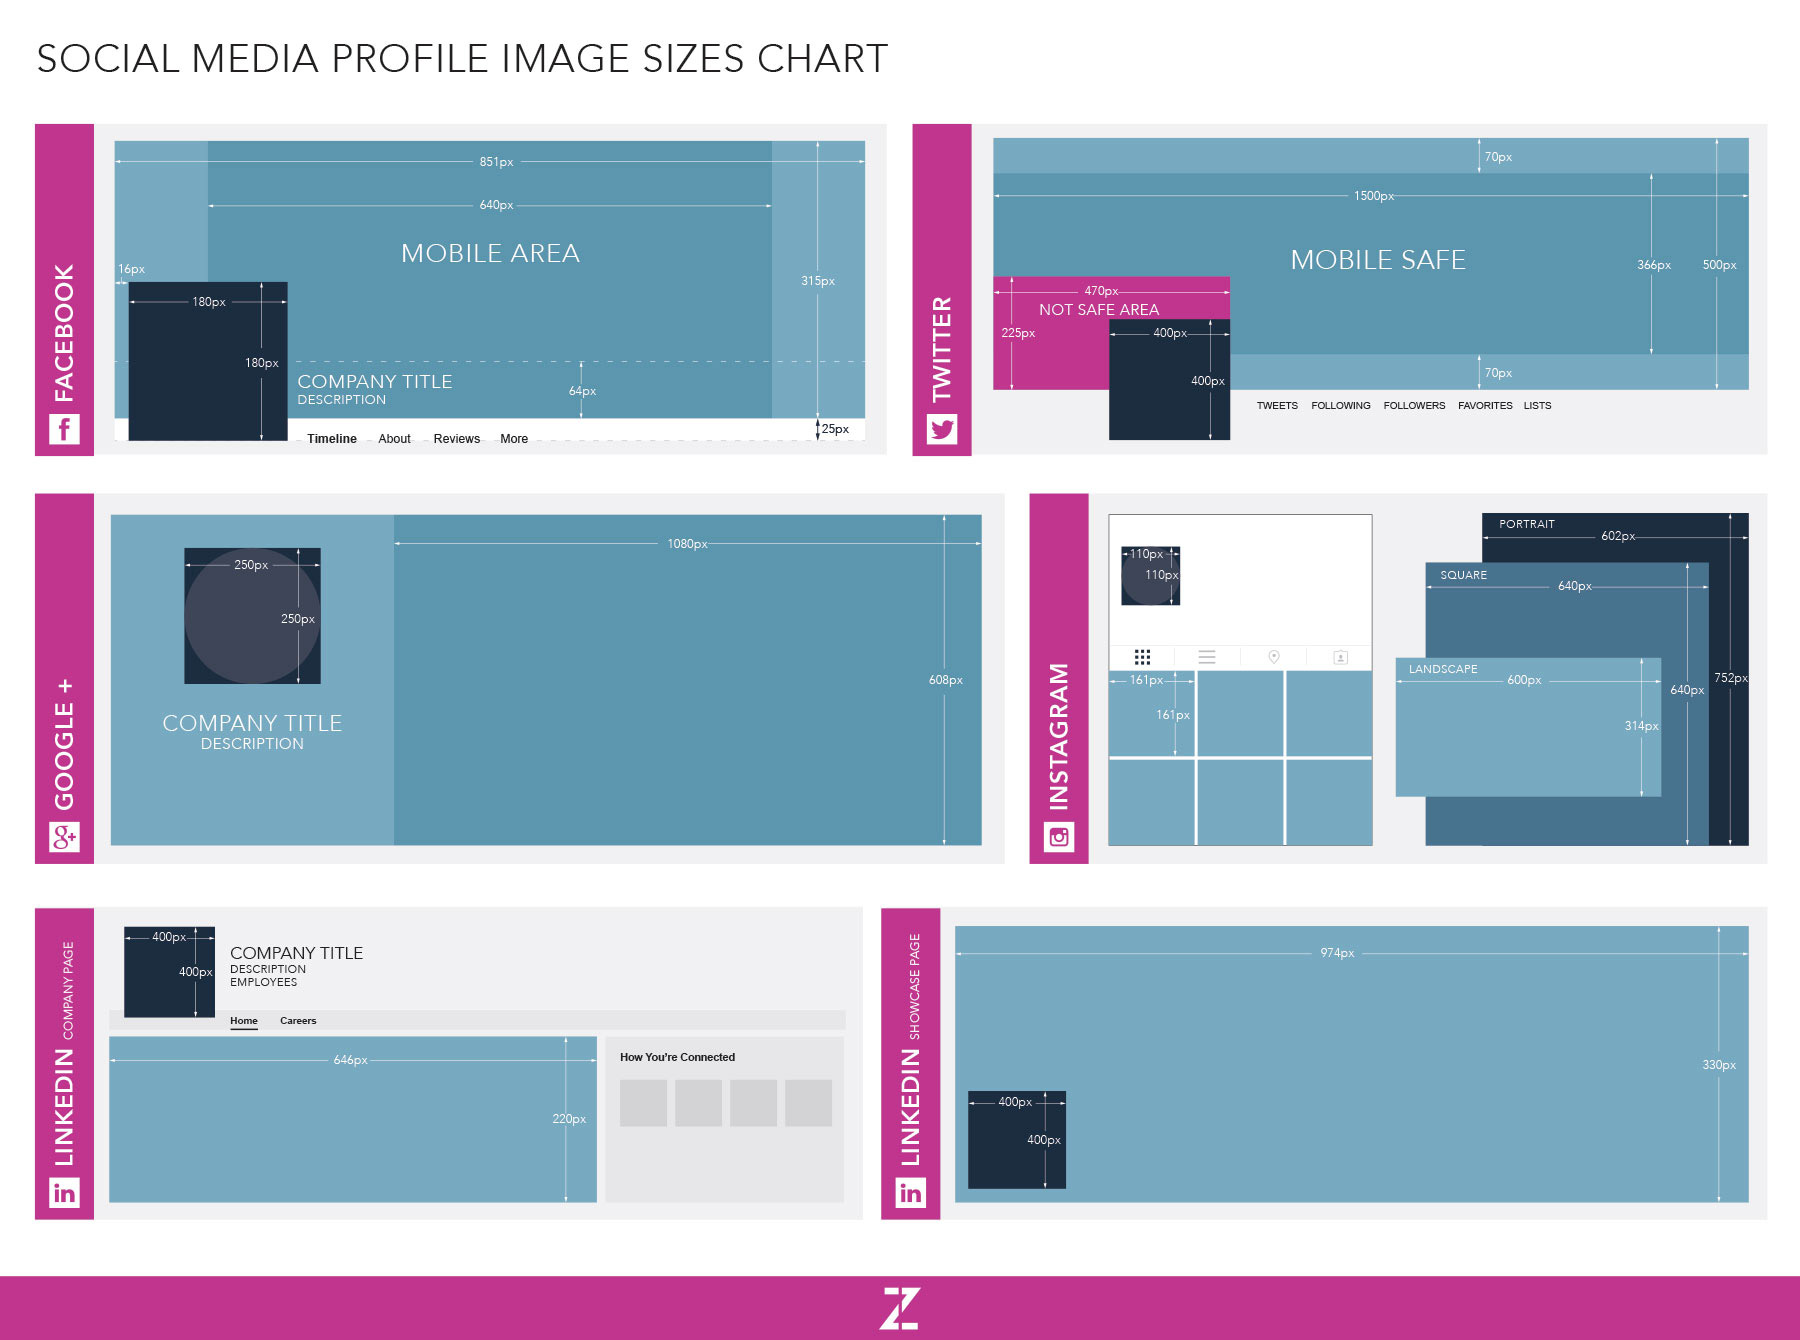 Social Media Graphic Sizes and Dimensions